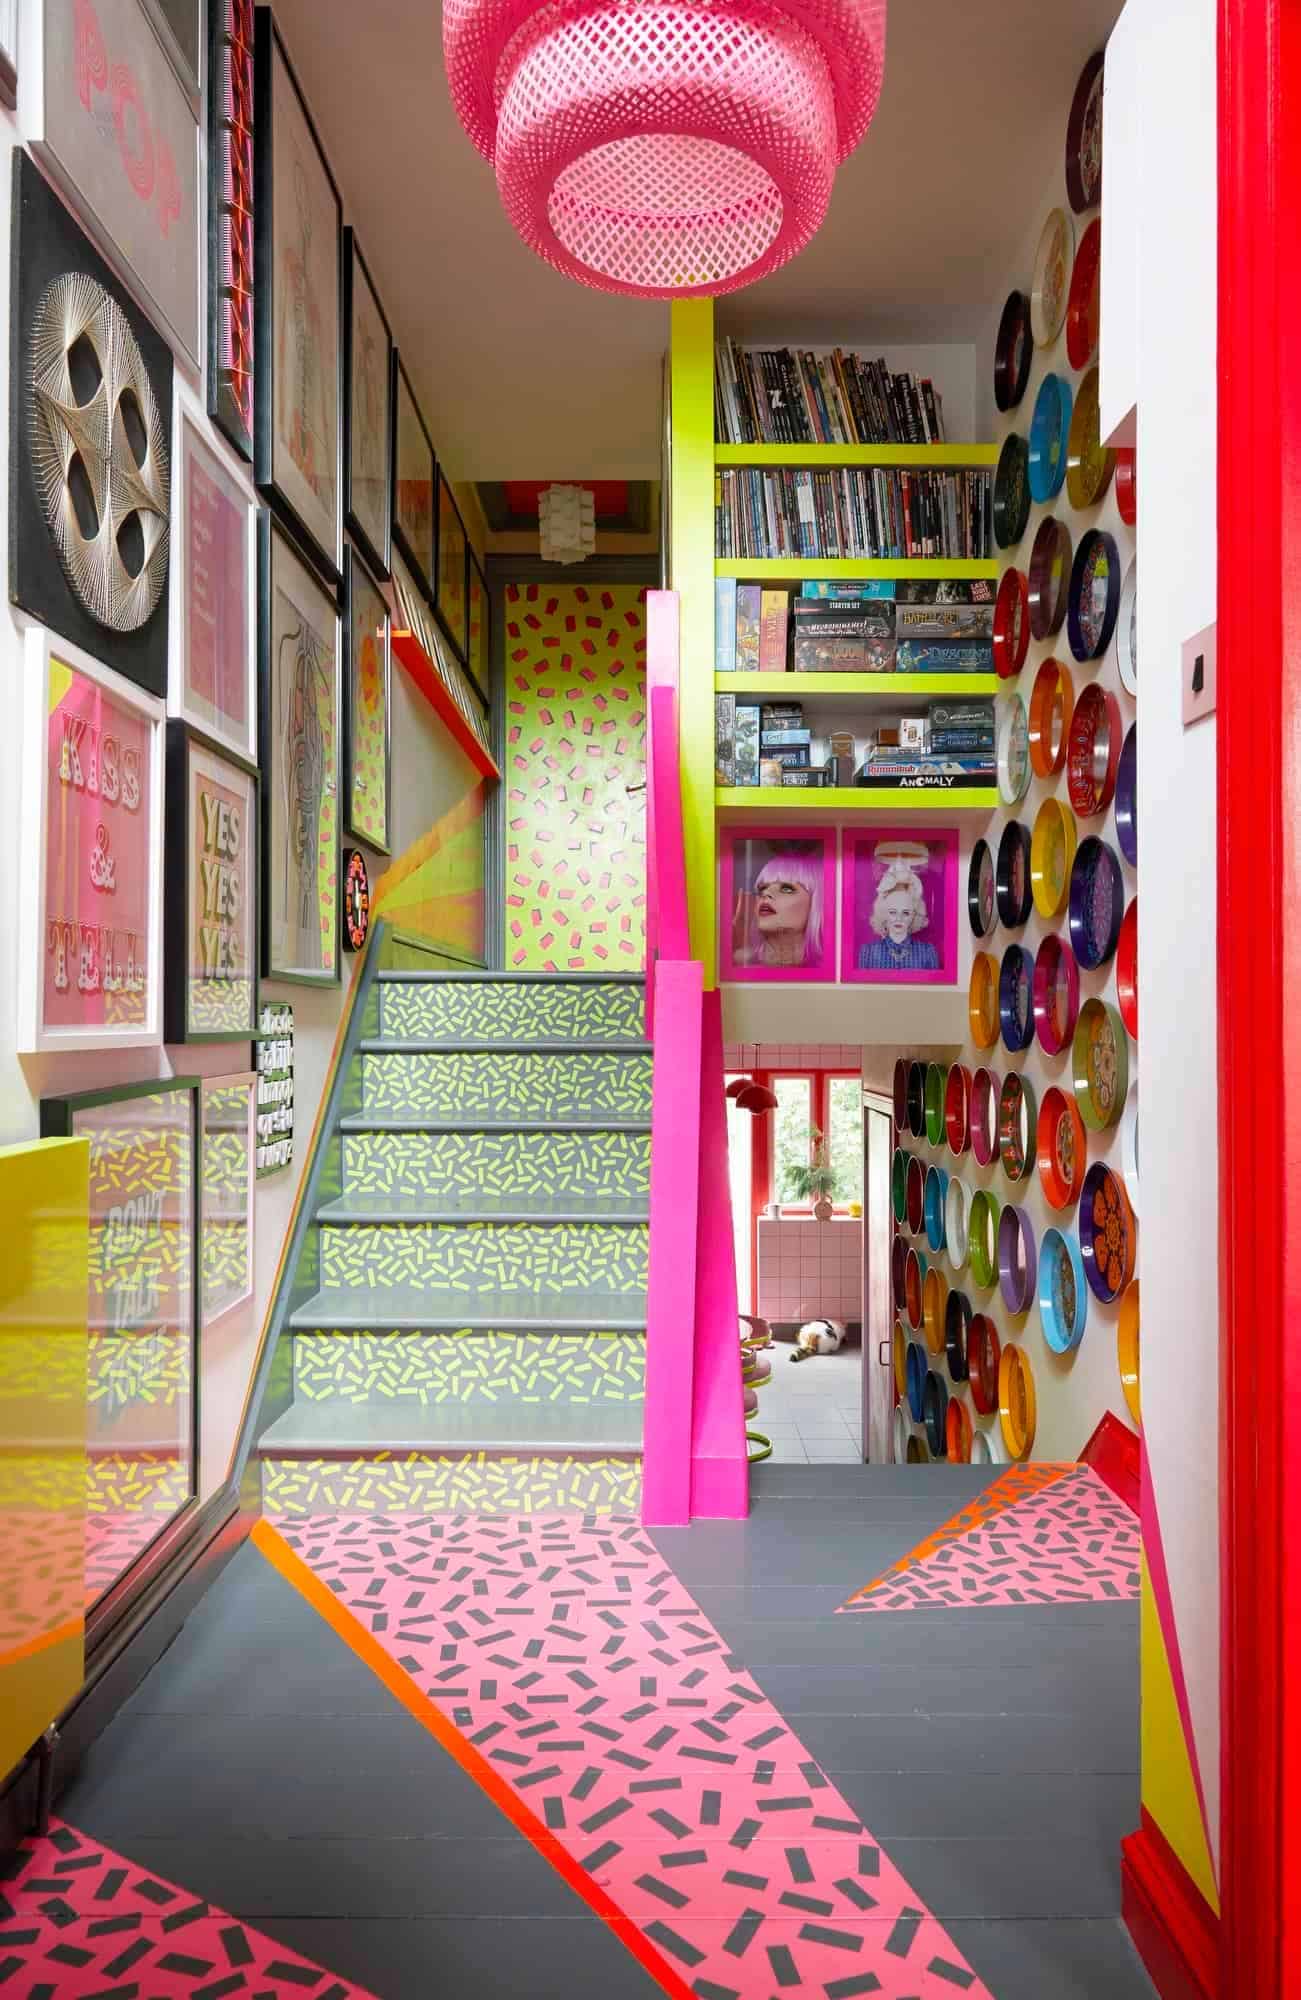 Harlequin - Colourful Location Property in London - The Location Guys